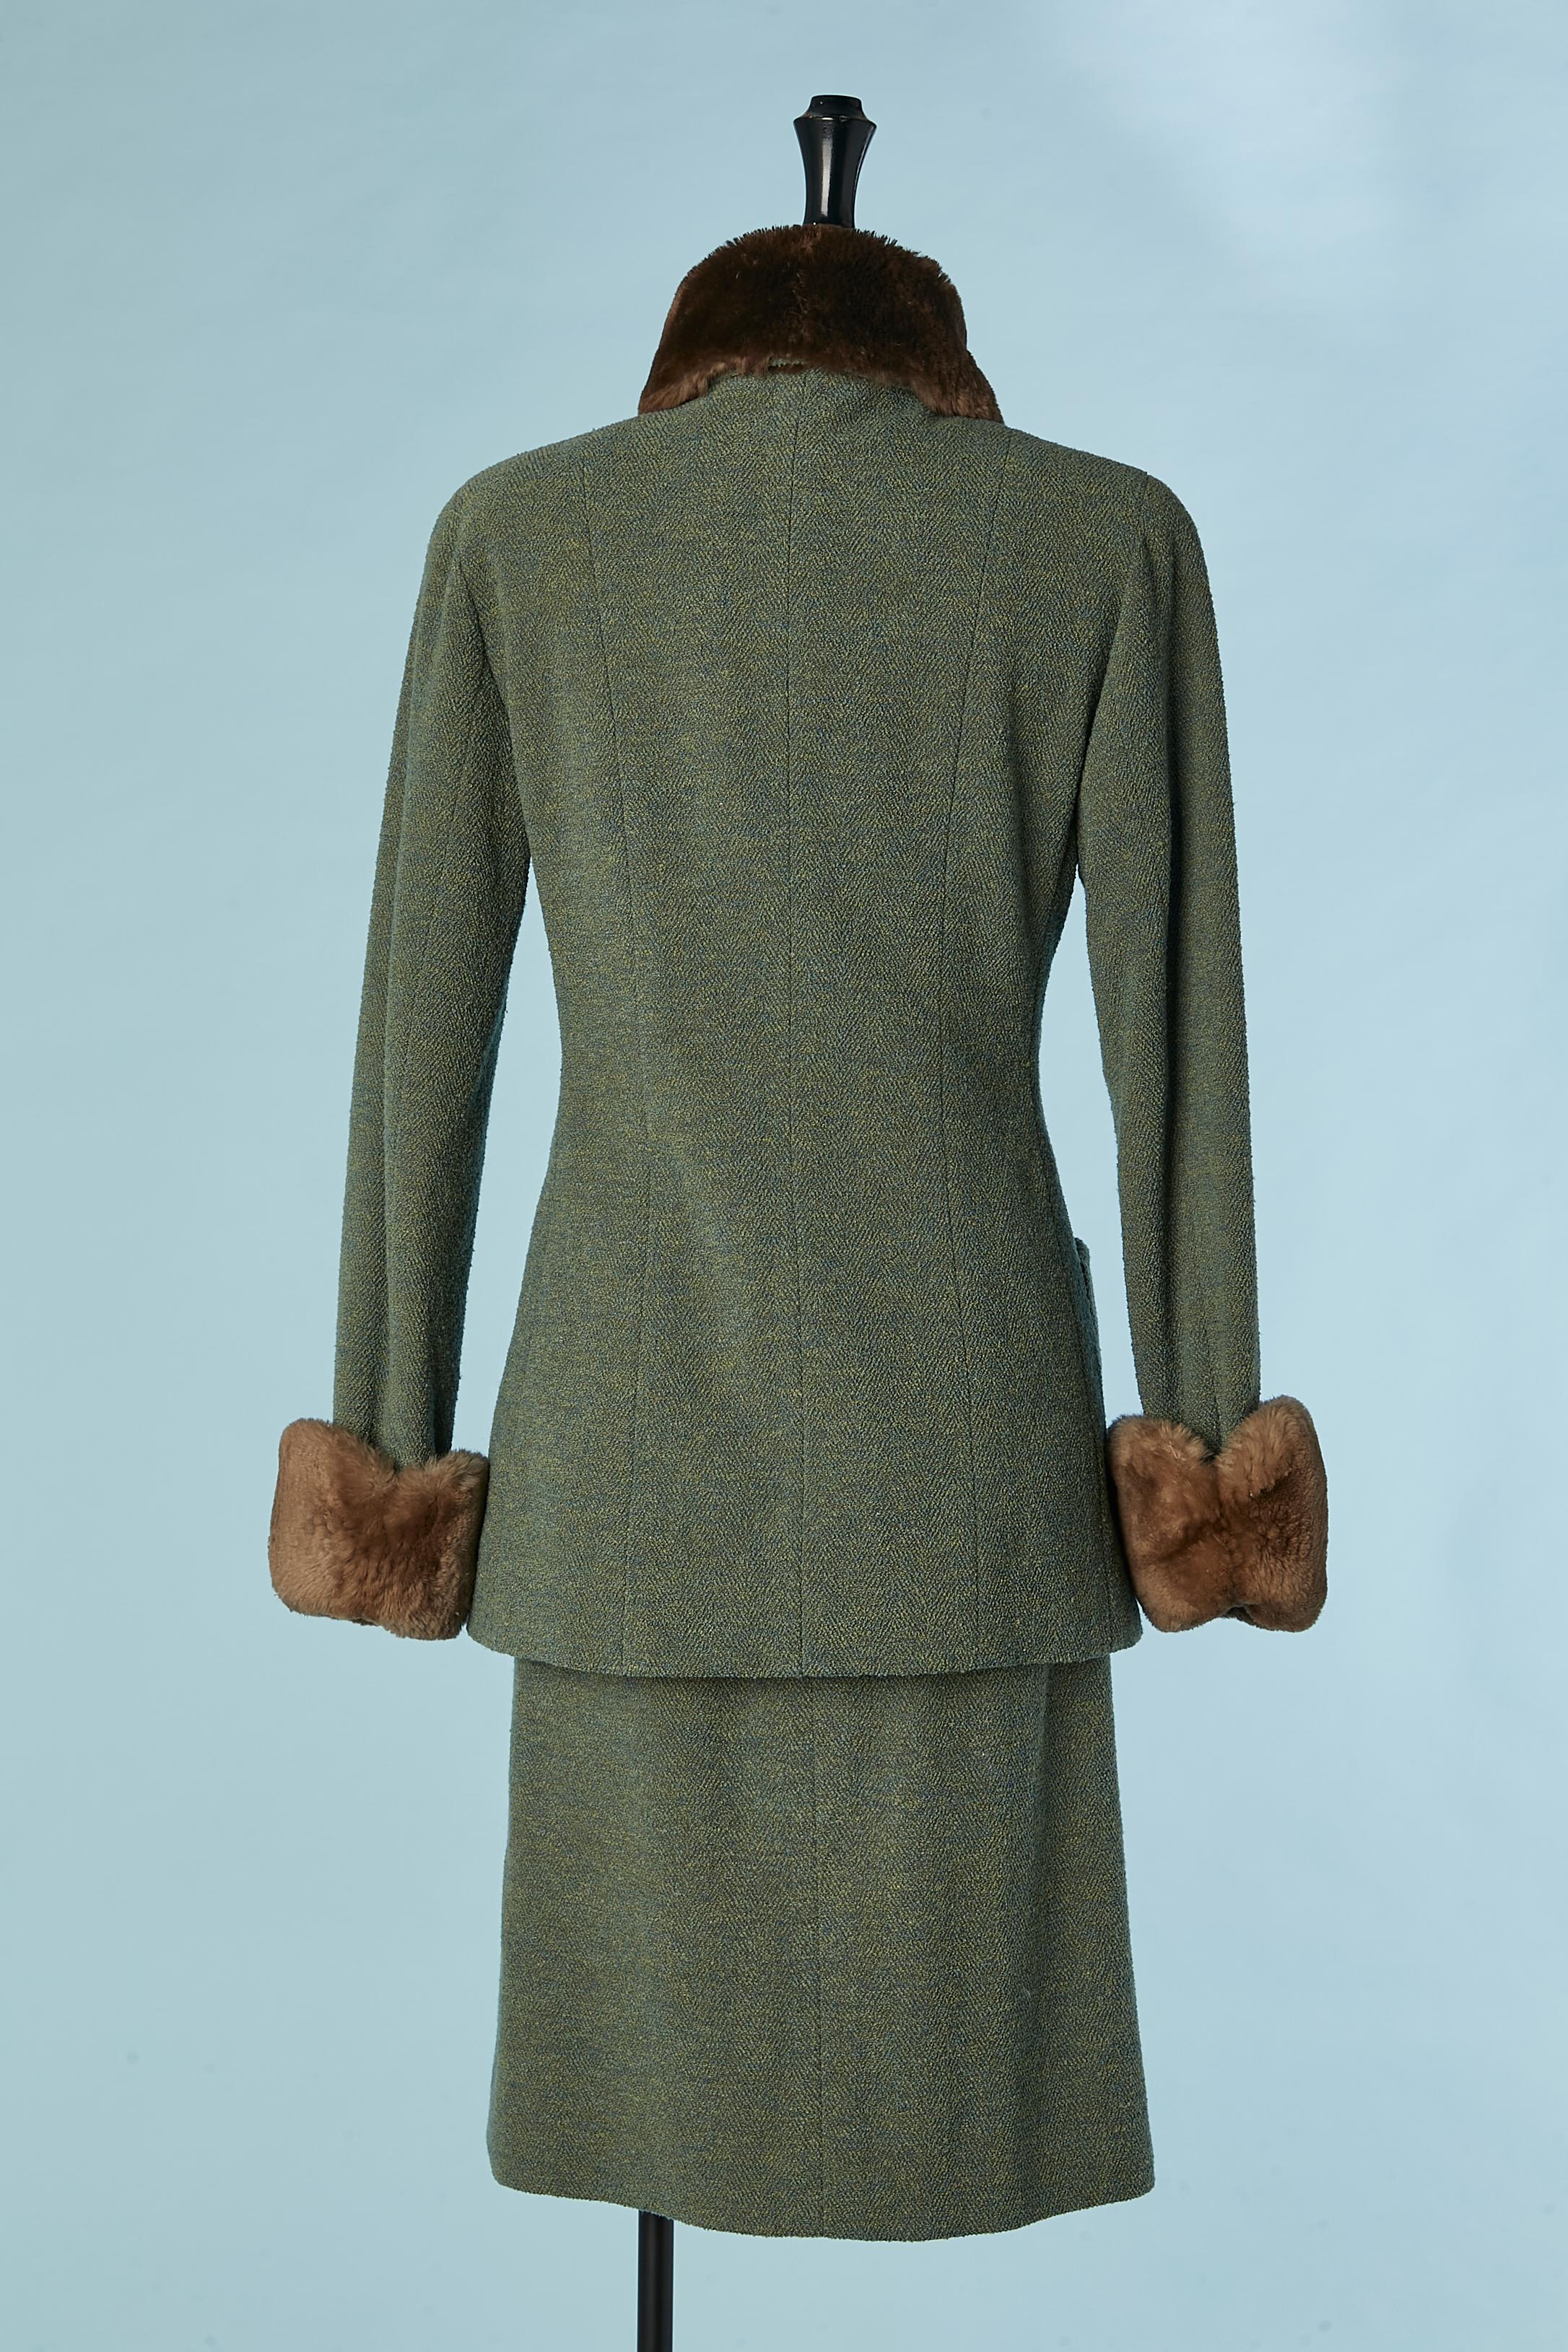 Green wool tweed skirt suit with gold buttons and fur pompoms Chanel Boutique  For Sale 2